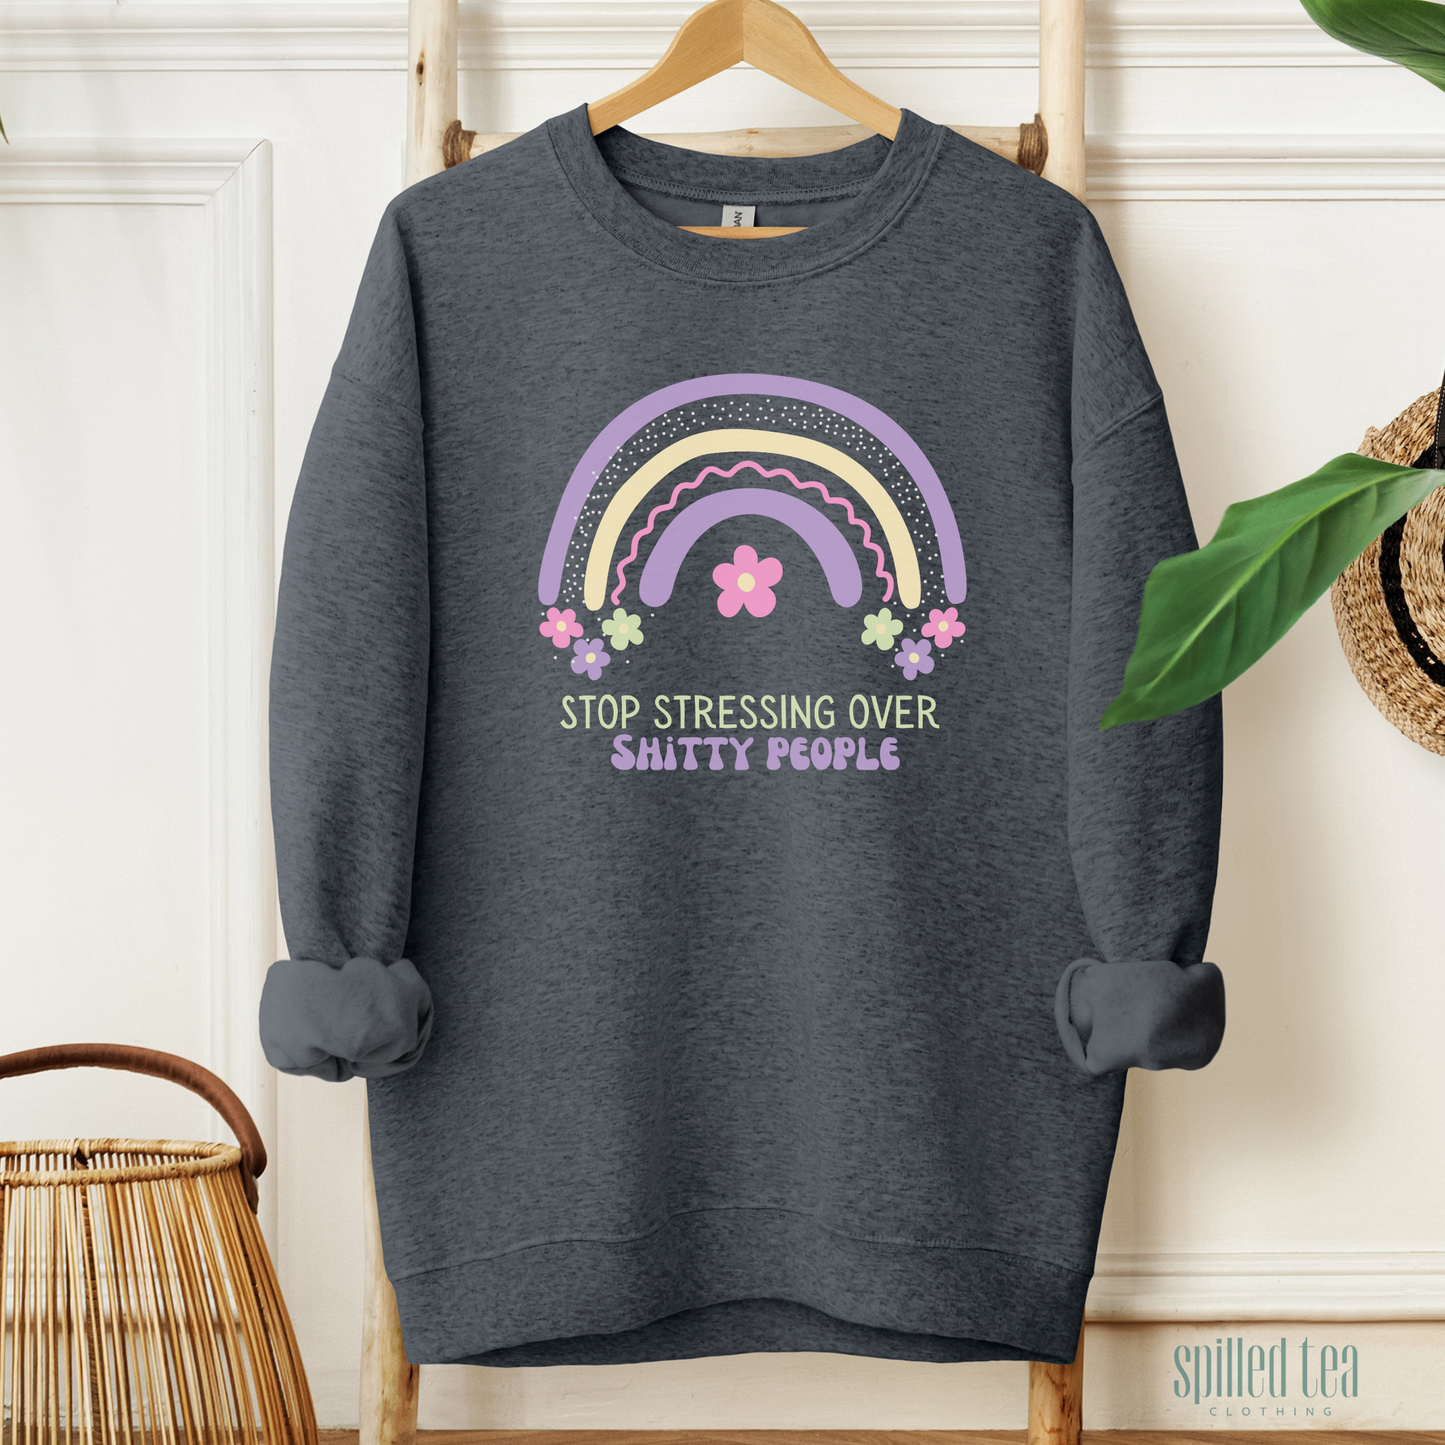 Stop Stressing Over Shitty People Sweatshirt